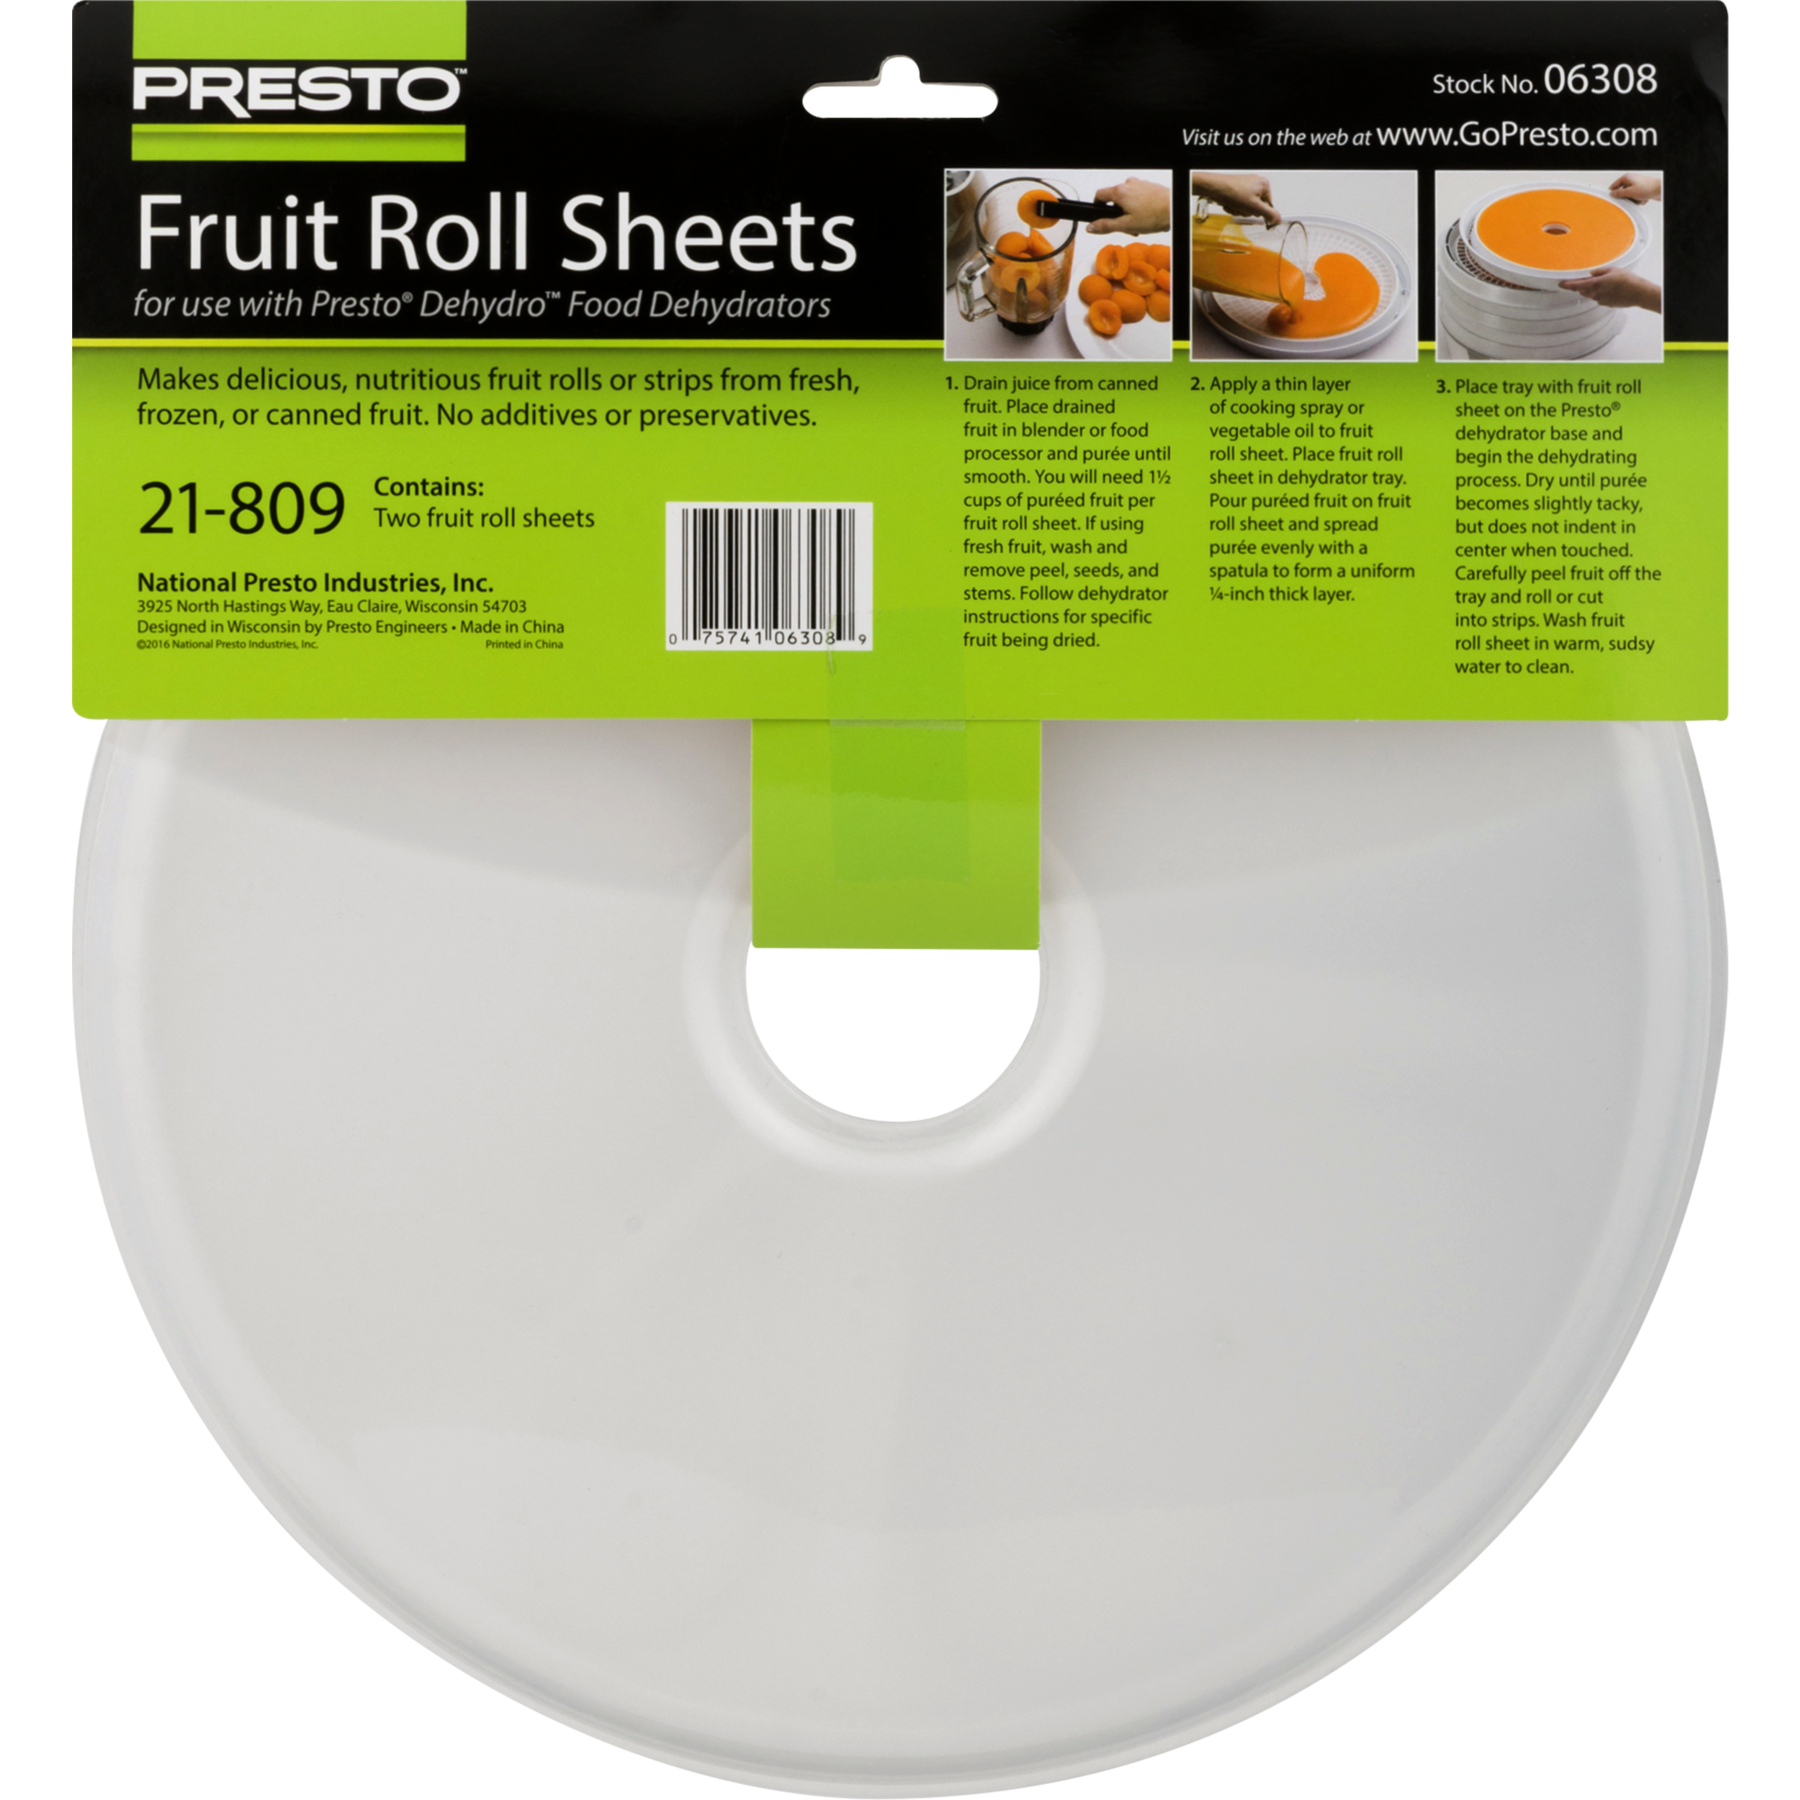 Presto Fruit Rolls Sheets, 2 Count - image 5 of 6